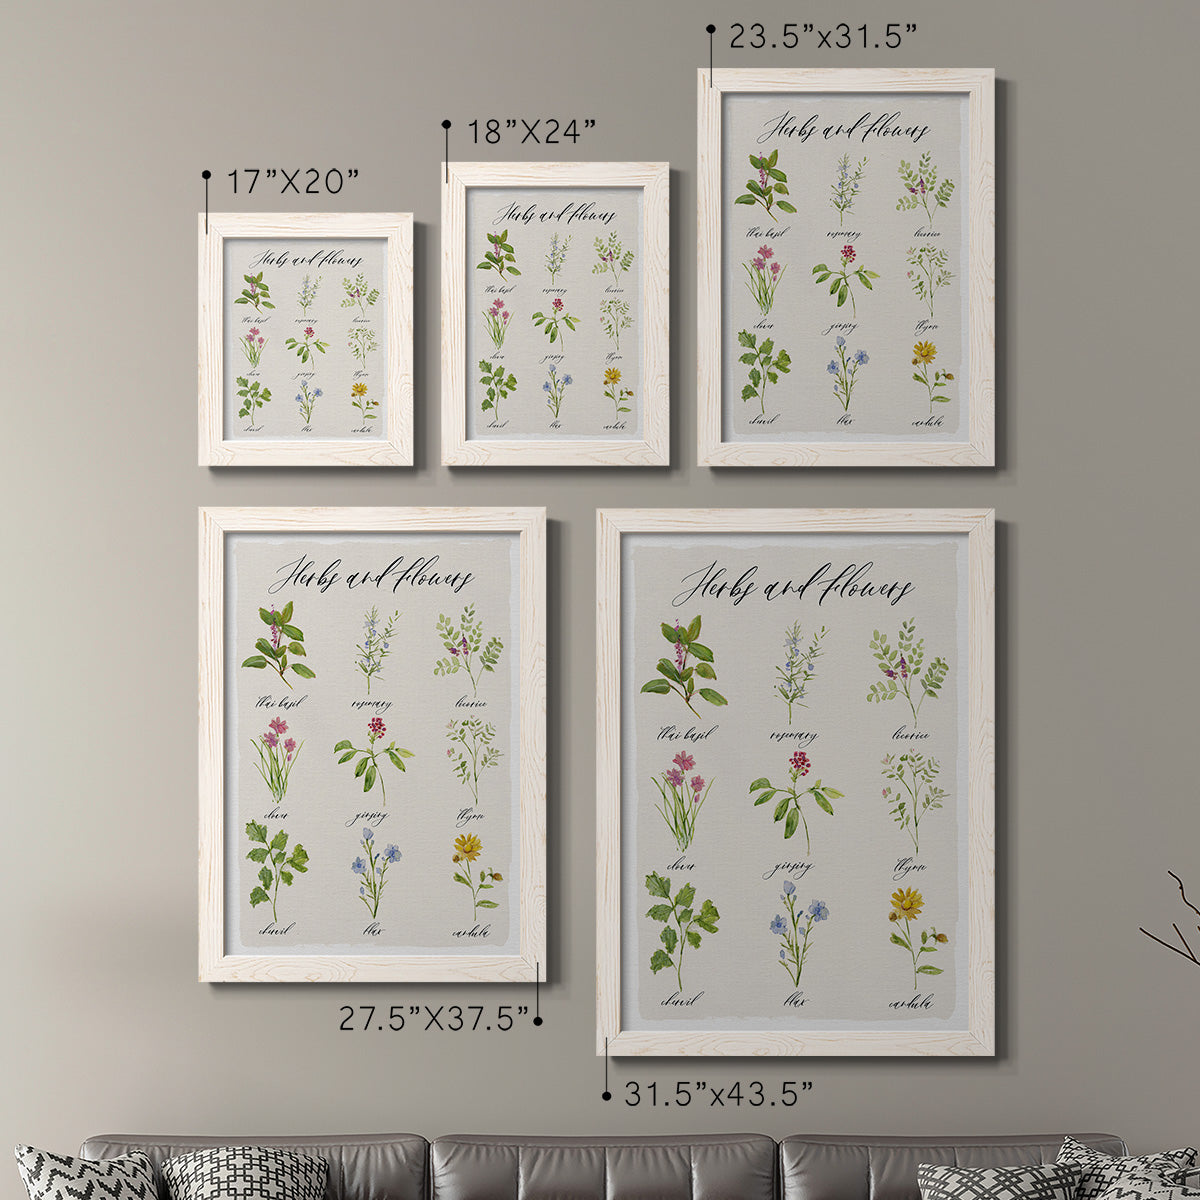 Herbs and Flowers - Premium Framed Canvas 2 Piece Set - Ready to Hang